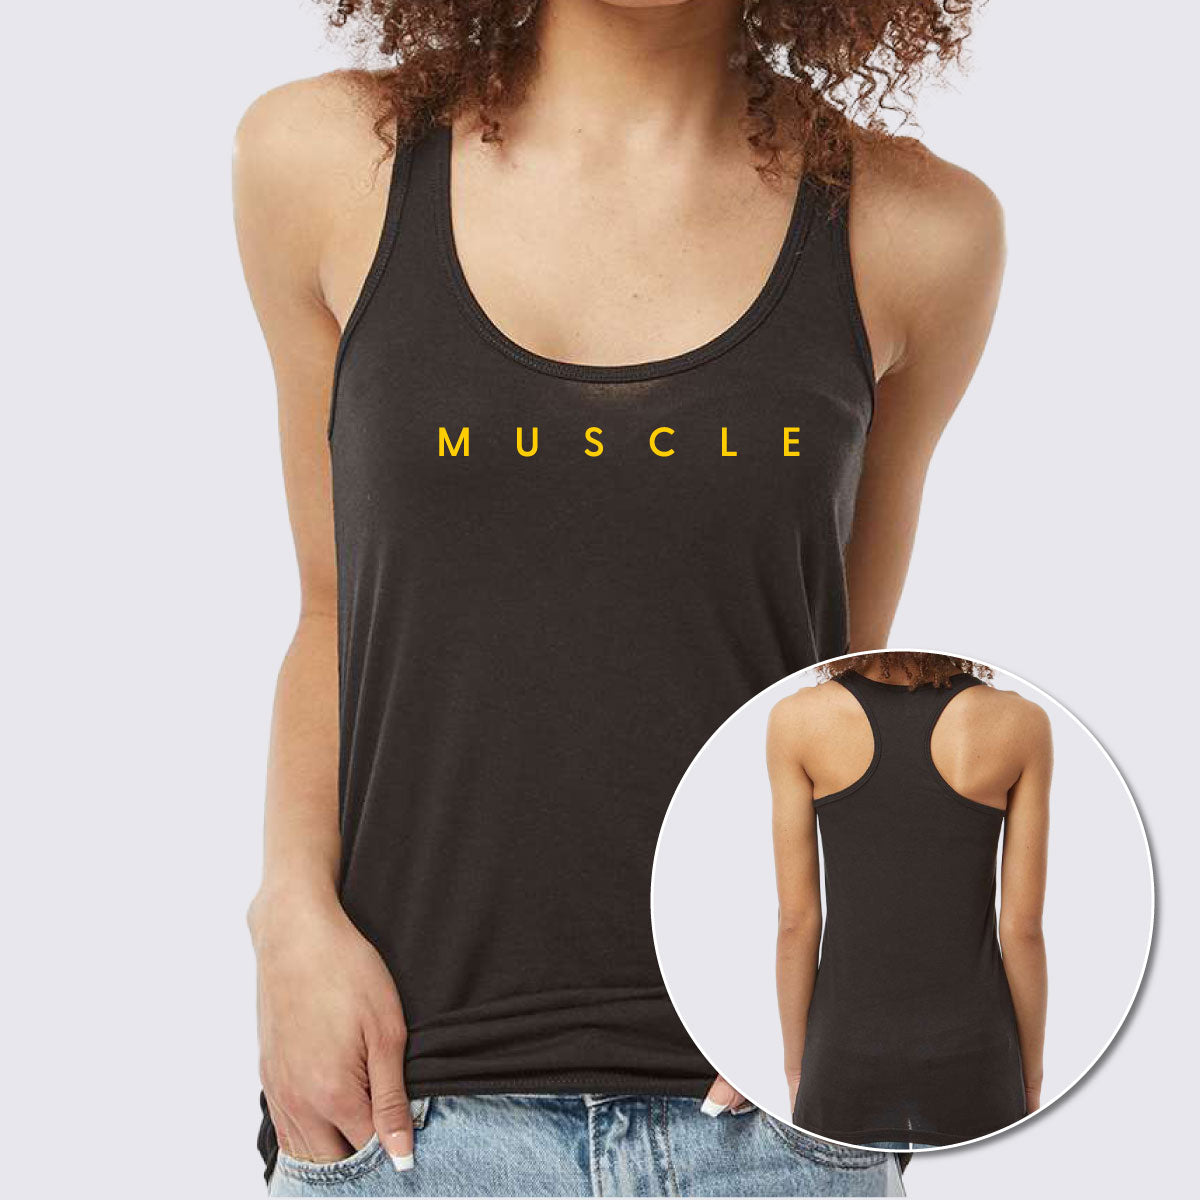 Muscle Women's Racerback Tank Top - The LFT Clothing Company